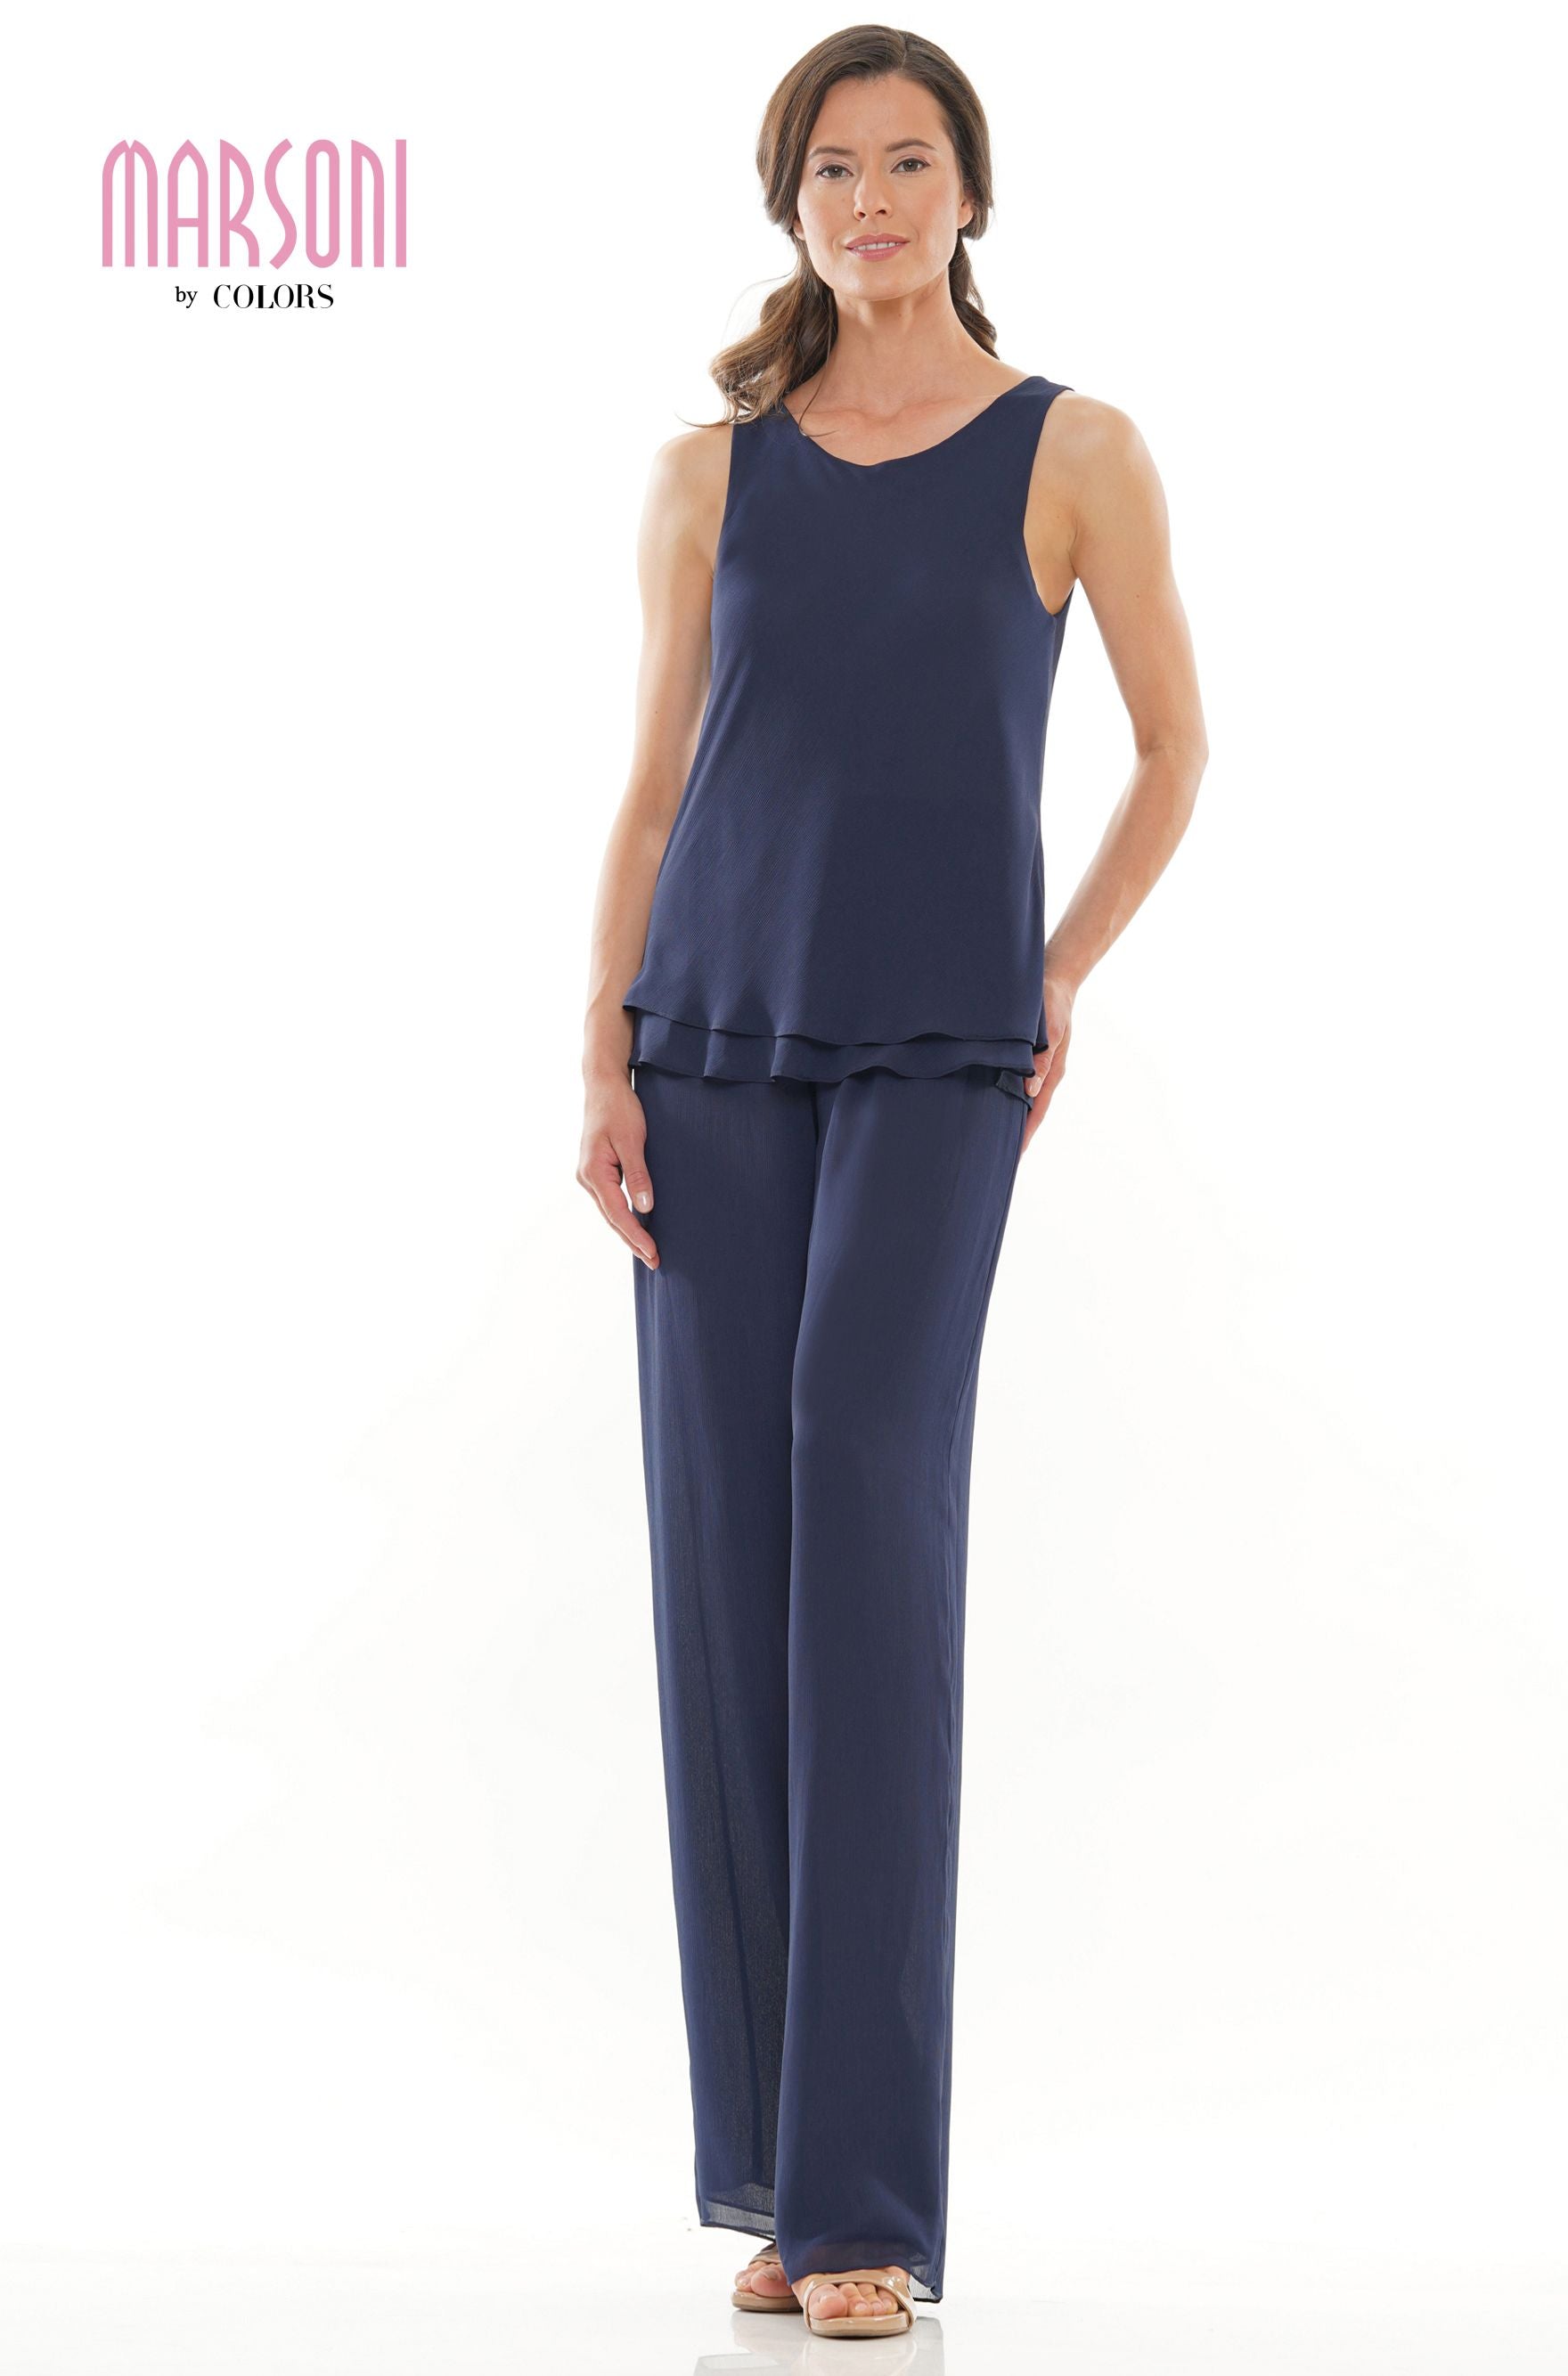 Clearance Sale Marsoni by Colors -M304 Pantsuit With Camisol